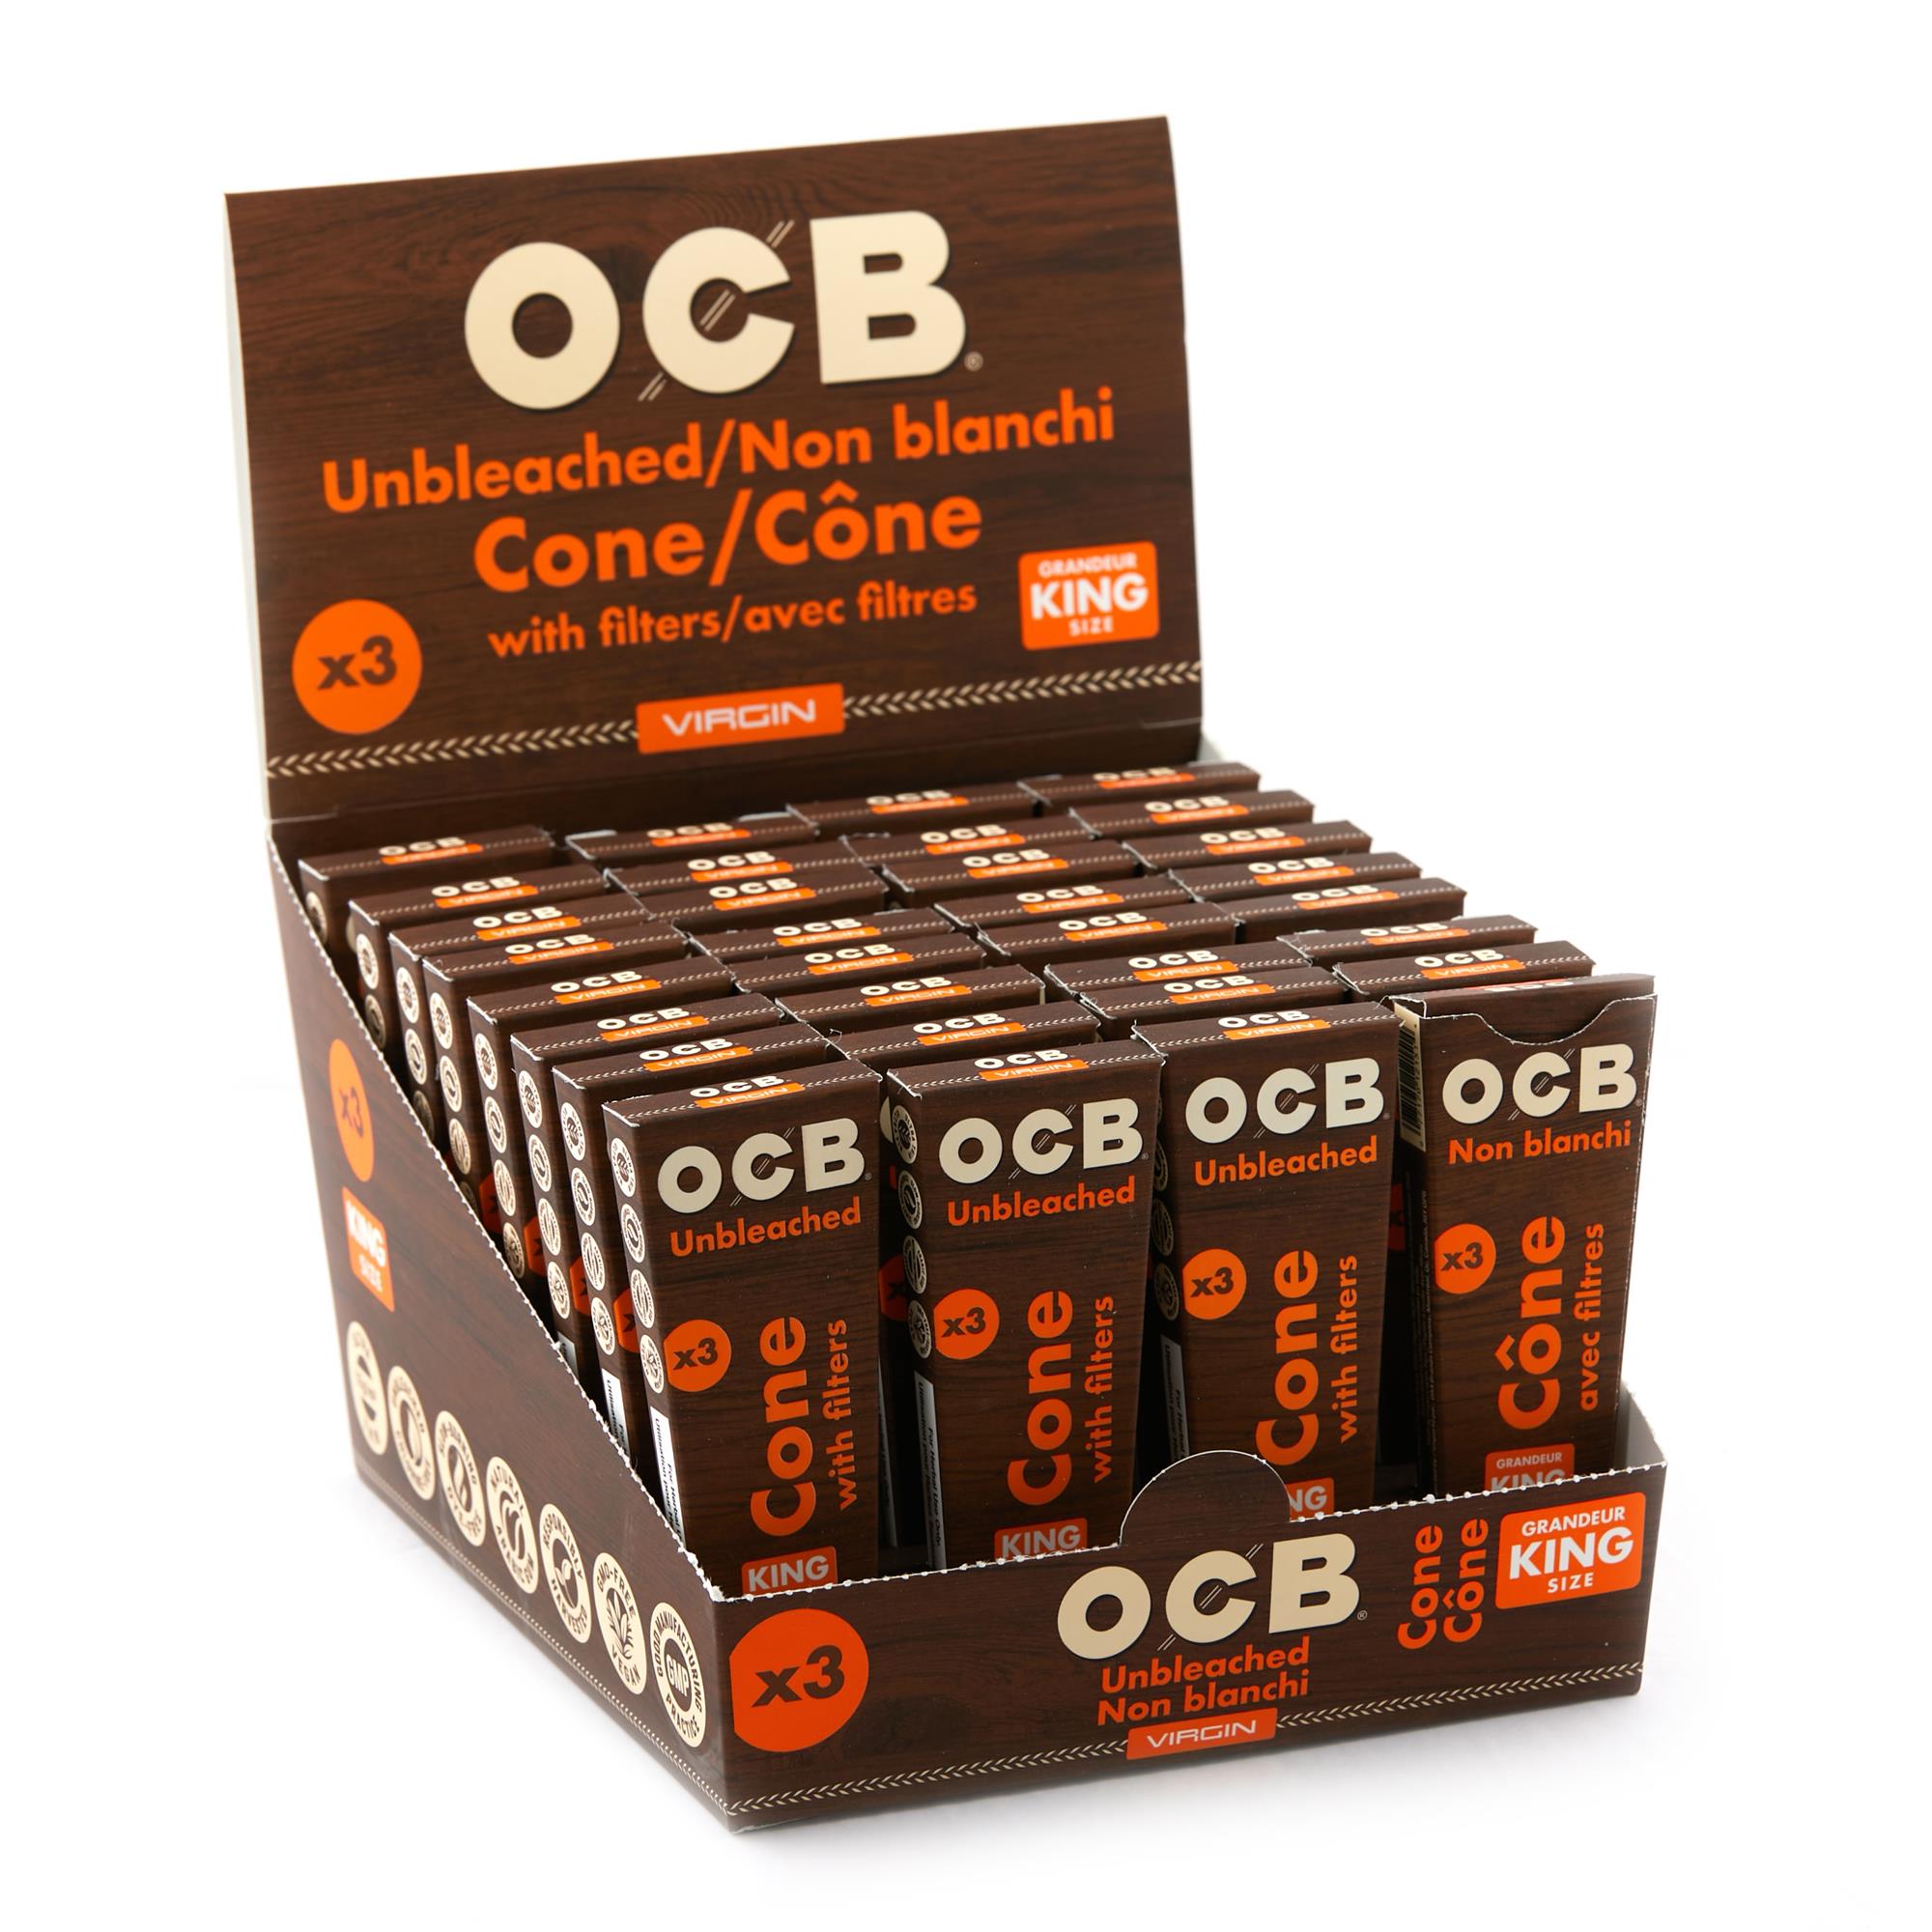 OCB VIRGIN UNBLEACHED KING SIZE CONES 3 PACK